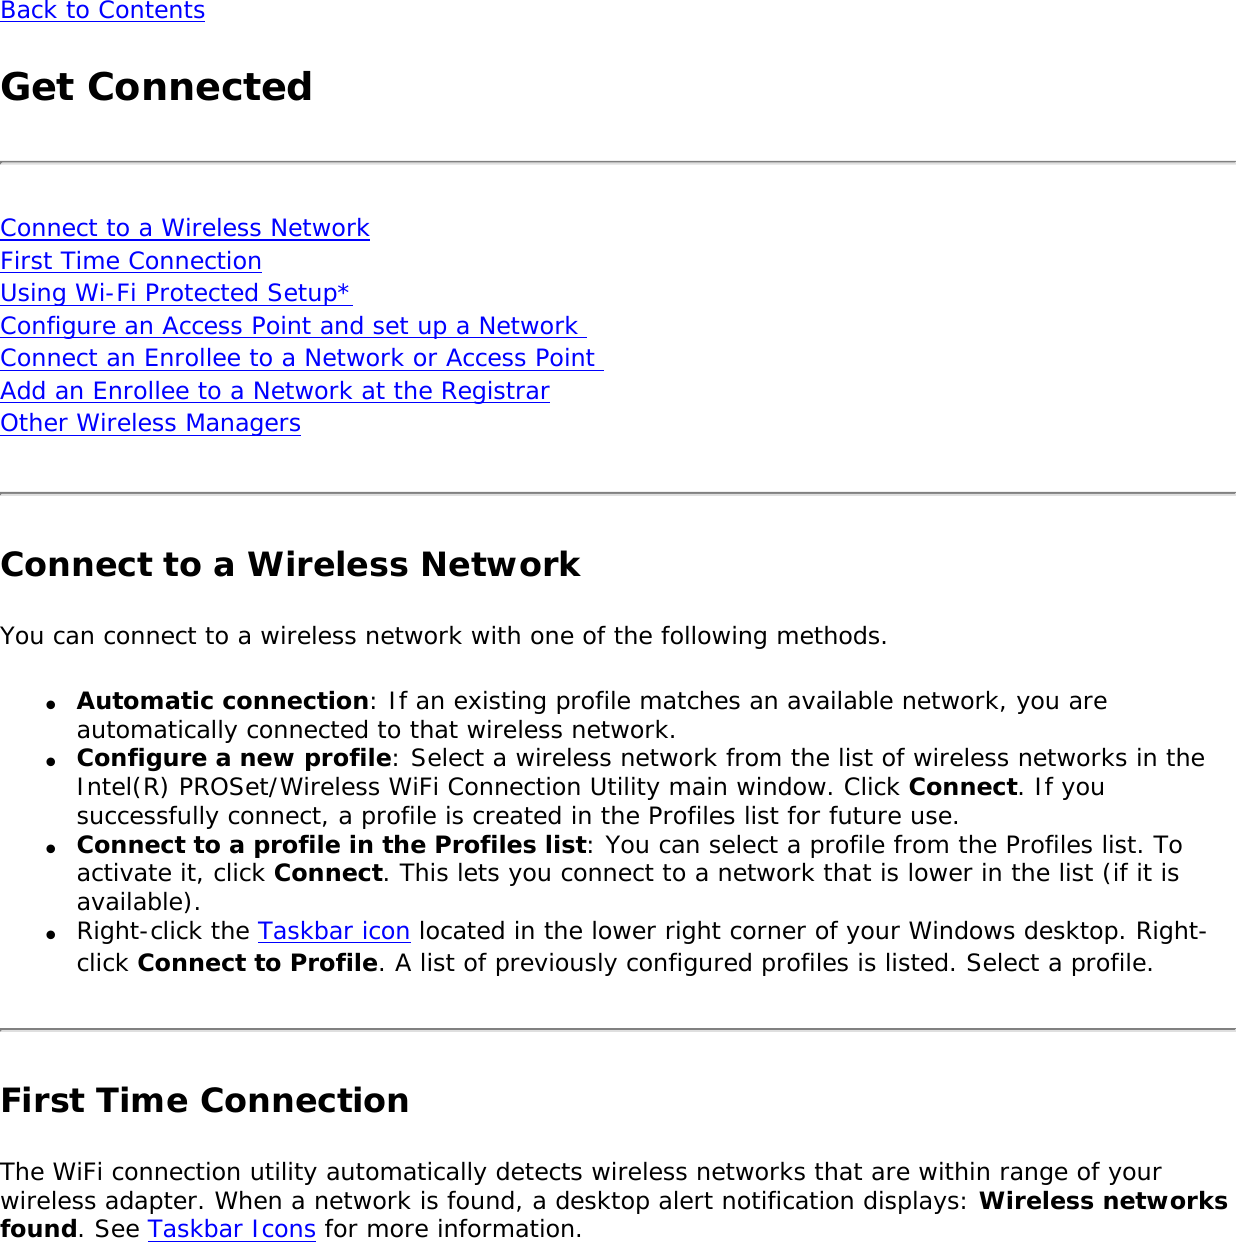 Back to ContentsGet ConnectedConnect to a Wireless Network First Time Connection Using Wi-Fi Protected Setup* Configure an Access Point and set up a Network  Connect an Enrollee to a Network or Access Point  Add an Enrollee to a Network at the Registrar Other Wireless ManagersConnect to a Wireless NetworkYou can connect to a wireless network with one of the following methods.●     Automatic connection: If an existing profile matches an available network, you are automatically connected to that wireless network. ●     Configure a new profile: Select a wireless network from the list of wireless networks in the Intel(R) PROSet/Wireless WiFi Connection Utility main window. Click Connect. If you successfully connect, a profile is created in the Profiles list for future use.●     Connect to a profile in the Profiles list: You can select a profile from the Profiles list. To activate it, click Connect. This lets you connect to a network that is lower in the list (if it is available). ●     Right-click the Taskbar icon located in the lower right corner of your Windows desktop. Right-click Connect to Profile. A list of previously configured profiles is listed. Select a profile.First Time ConnectionThe WiFi connection utility automatically detects wireless networks that are within range of your wireless adapter. When a network is found, a desktop alert notification displays: Wireless networks found. See Taskbar Icons for more information.